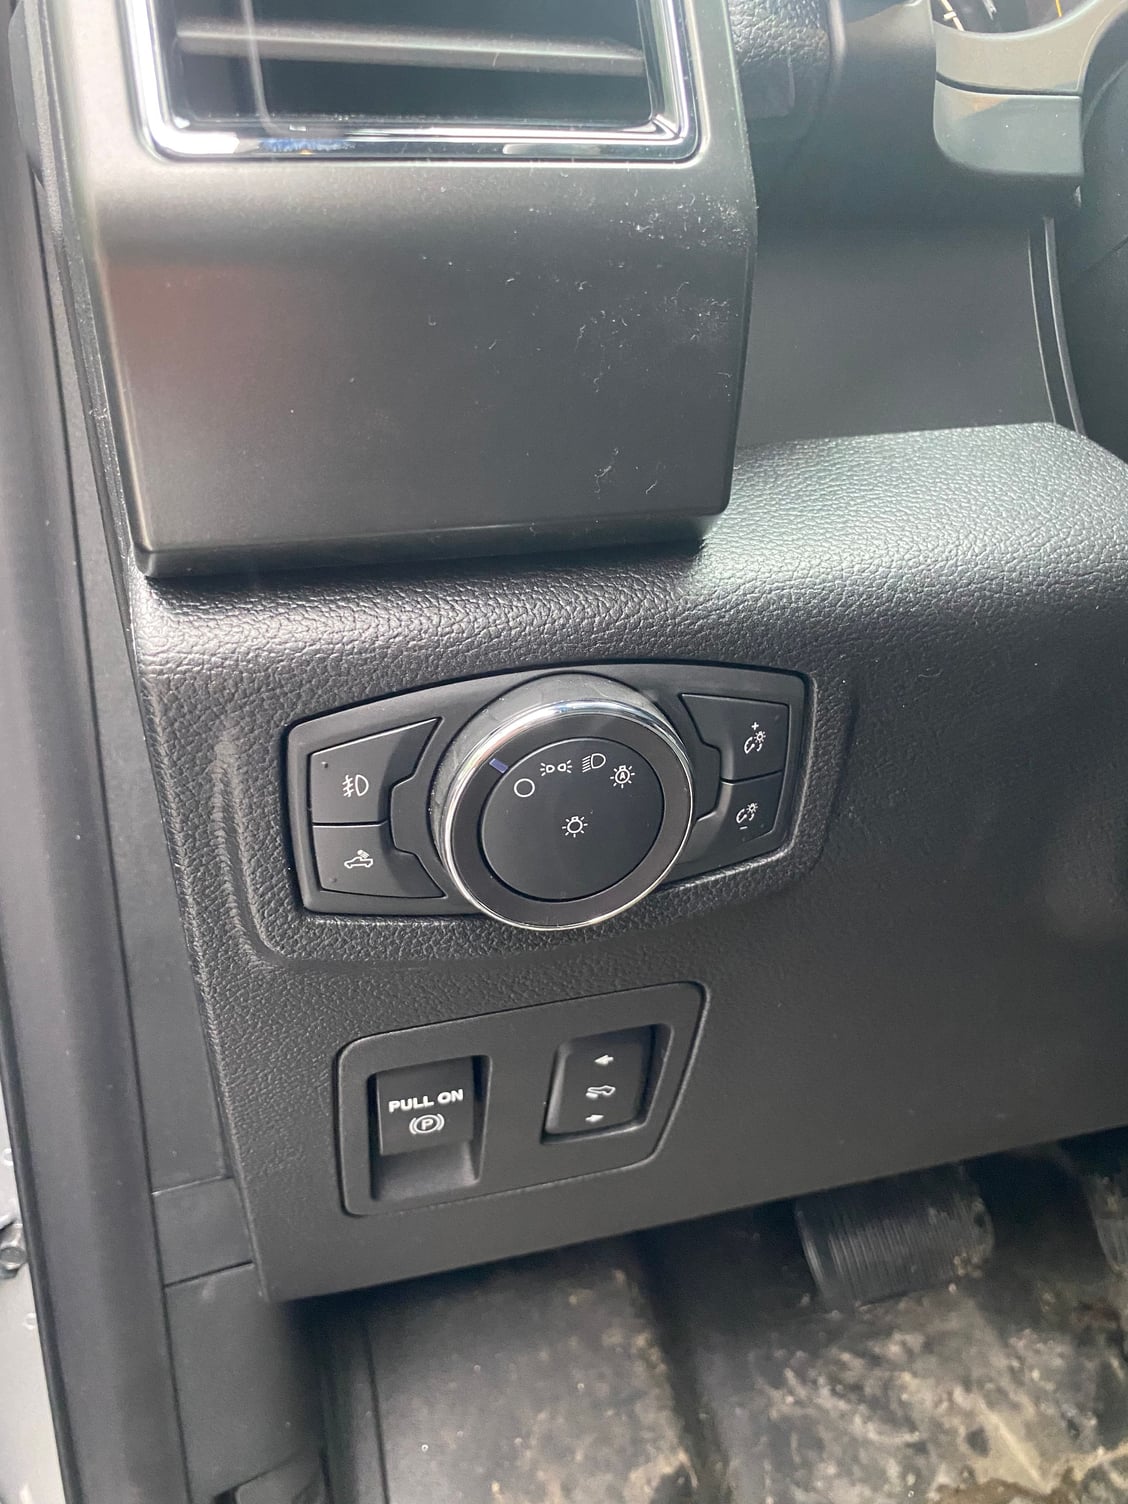 2019 f150 drl's will not shut off - Ford F150 Forum - Community of Ford 2017 F 150 110v Outlet Not Working